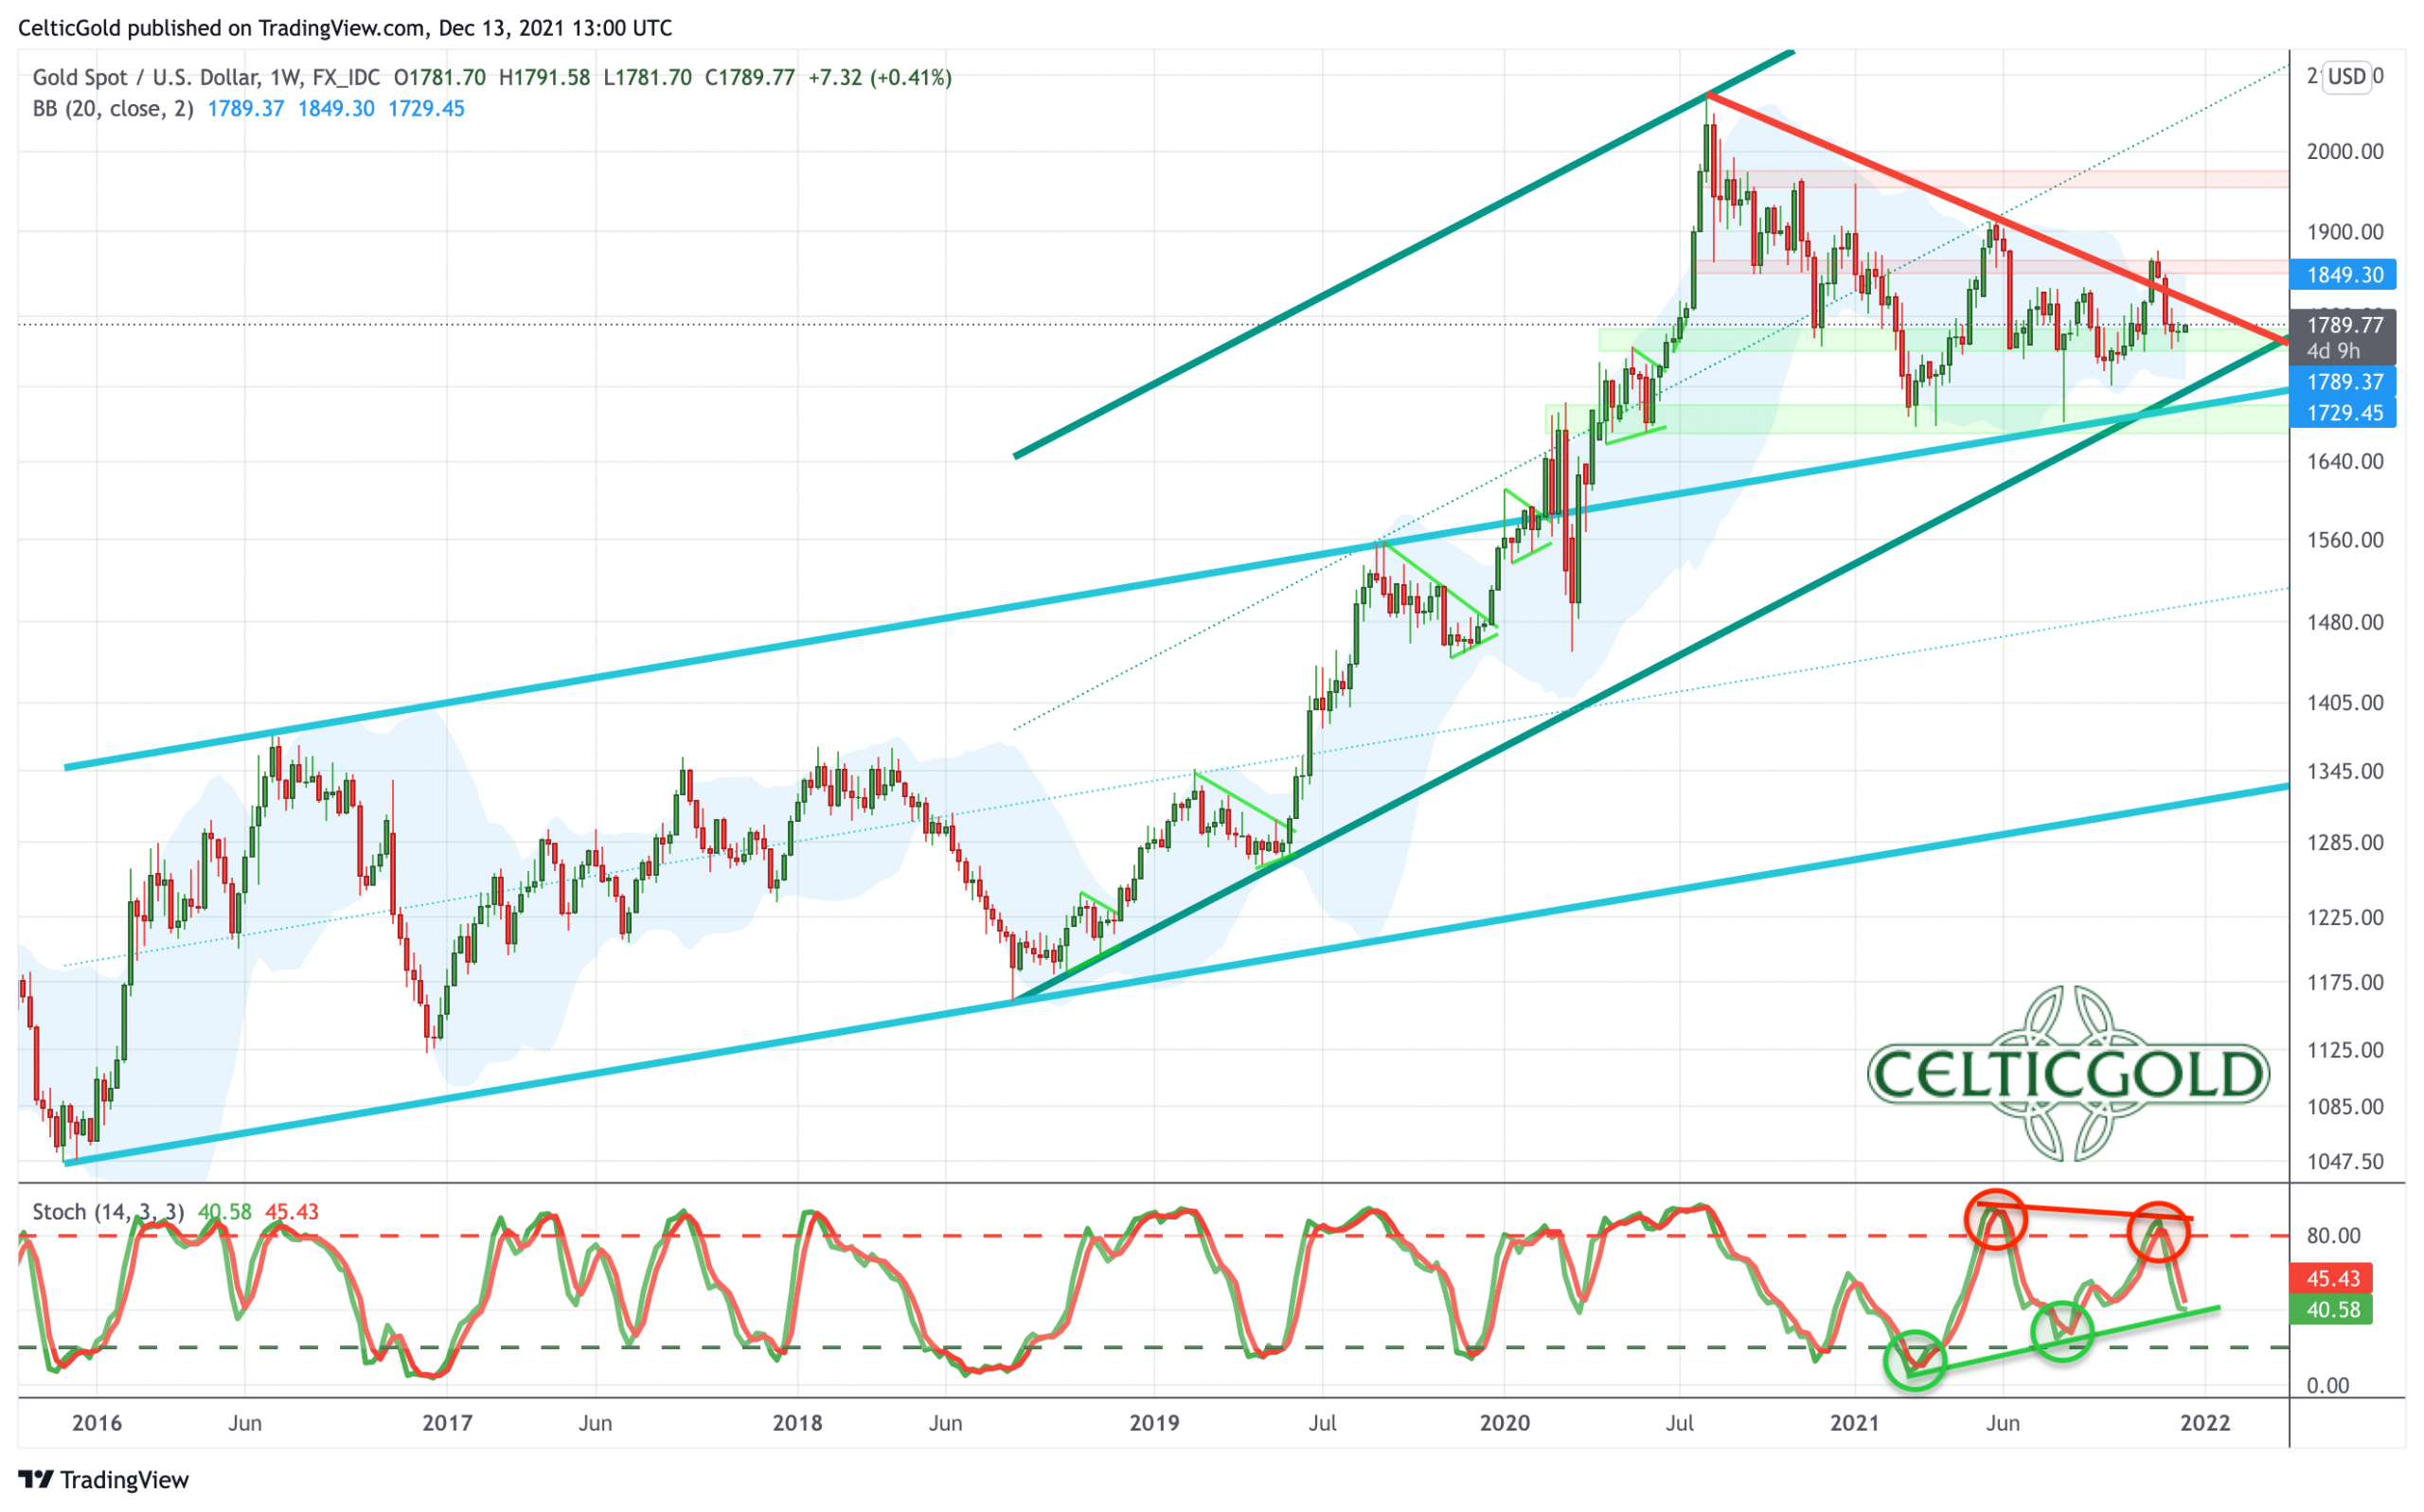 Gold in US-Dollars, weekly chart as of December 13th, 2021. Source: Tradingview. Gold - Recovery ahead